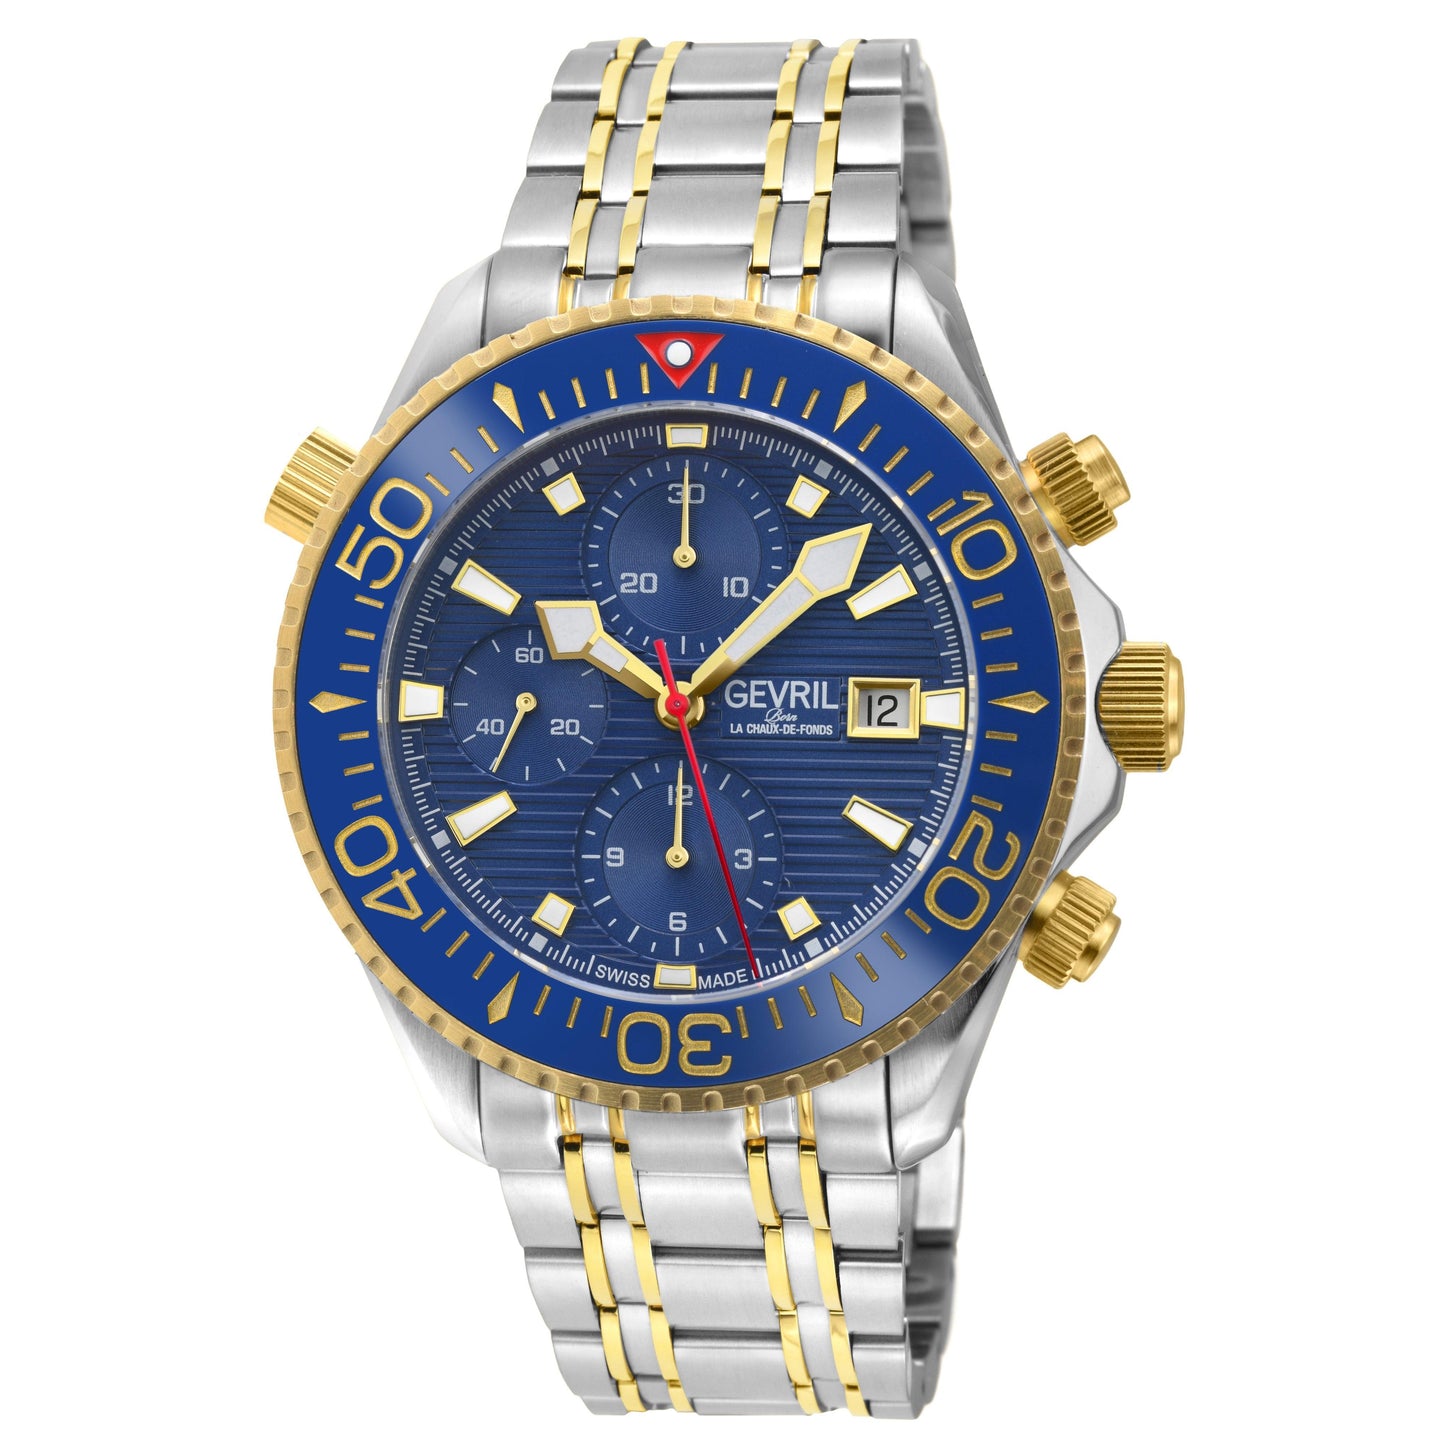 Gevril-Luxury-Swiss-Watches-Gevril Hudson Yards Chronograph - Diver-48813B